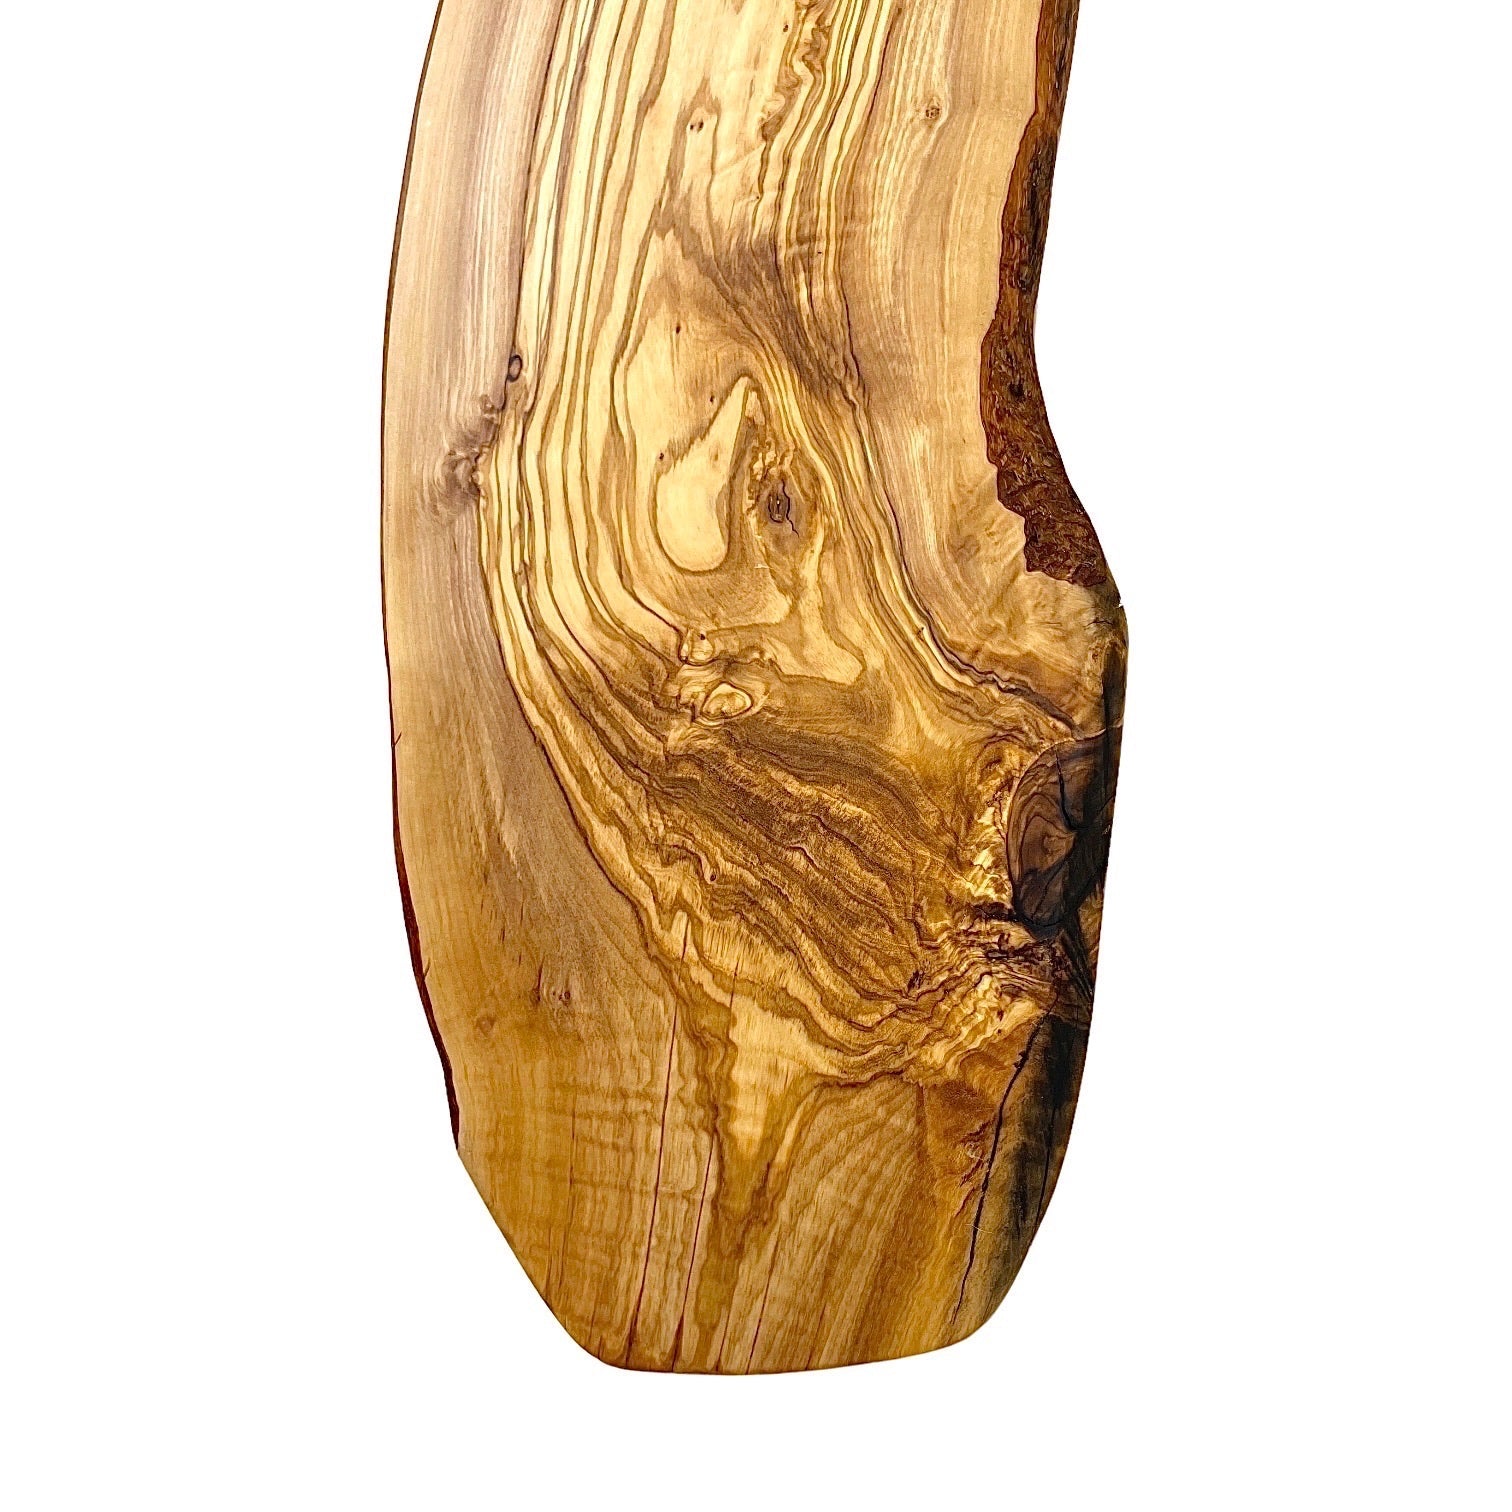 Live-edge Rustic Olive Wood - Handmade Charcuterie Boards - RTS large board front detail view